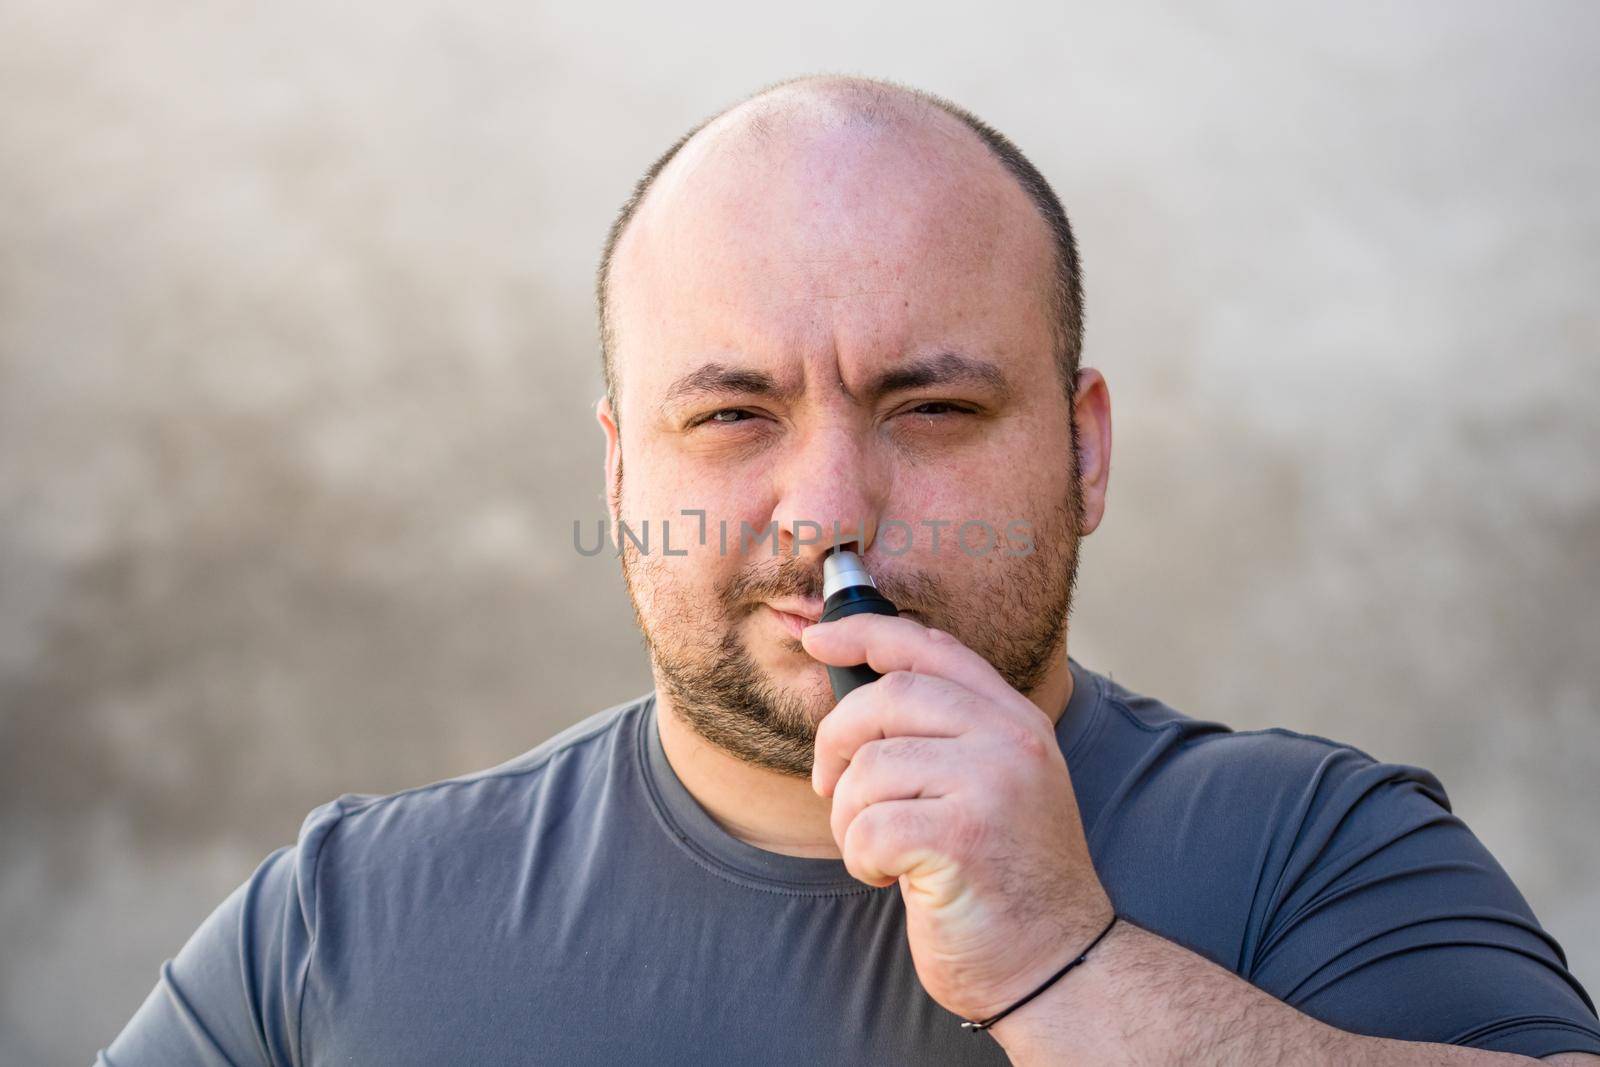 Male shaving ortrimming his nose hair using a hair clipper or electric razor